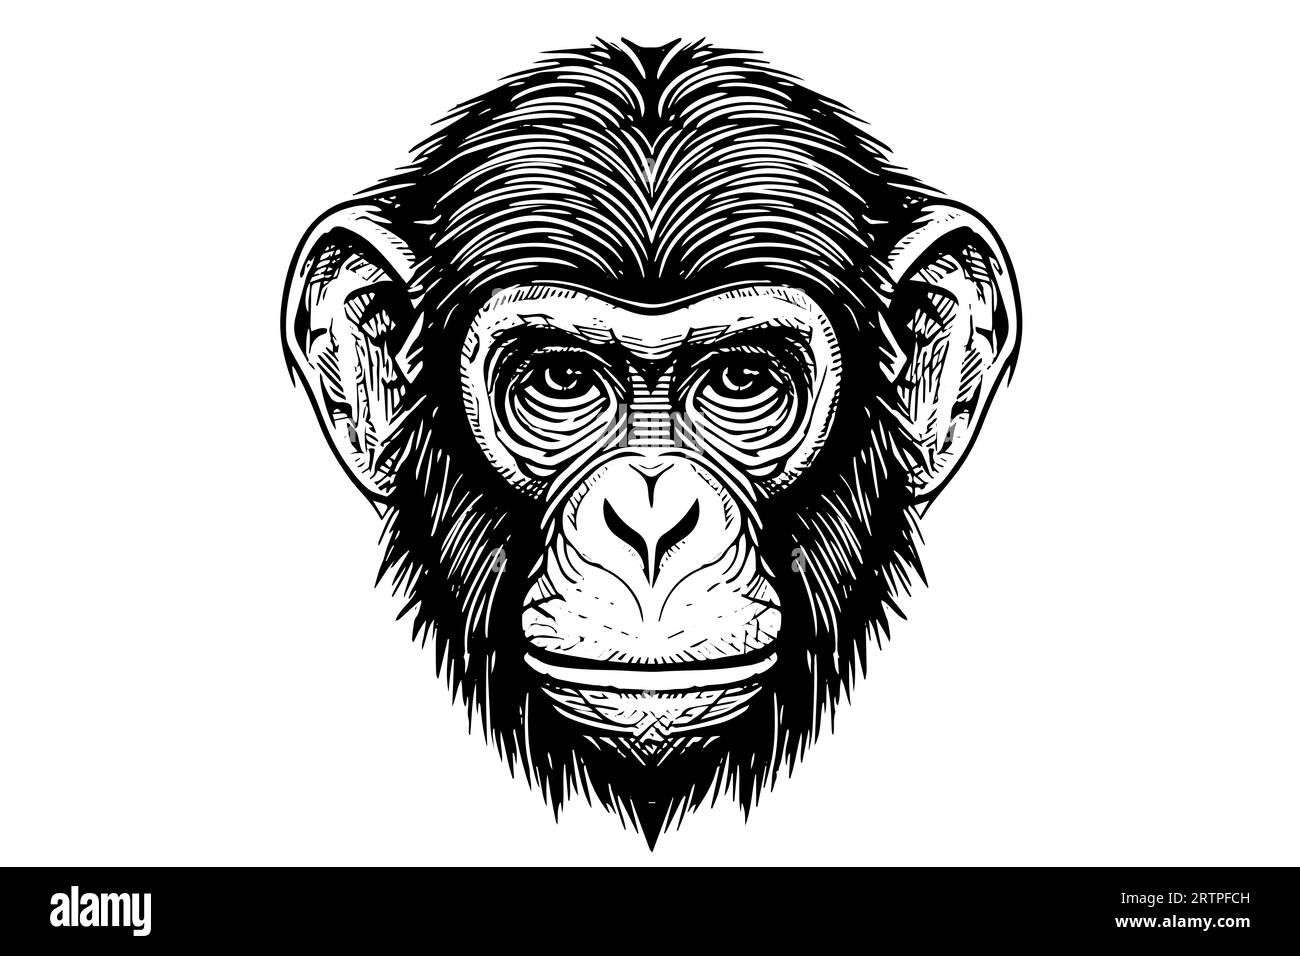 Monkey head or face hand drawn vector illustration in engraving style ink sketch. Stock Vector